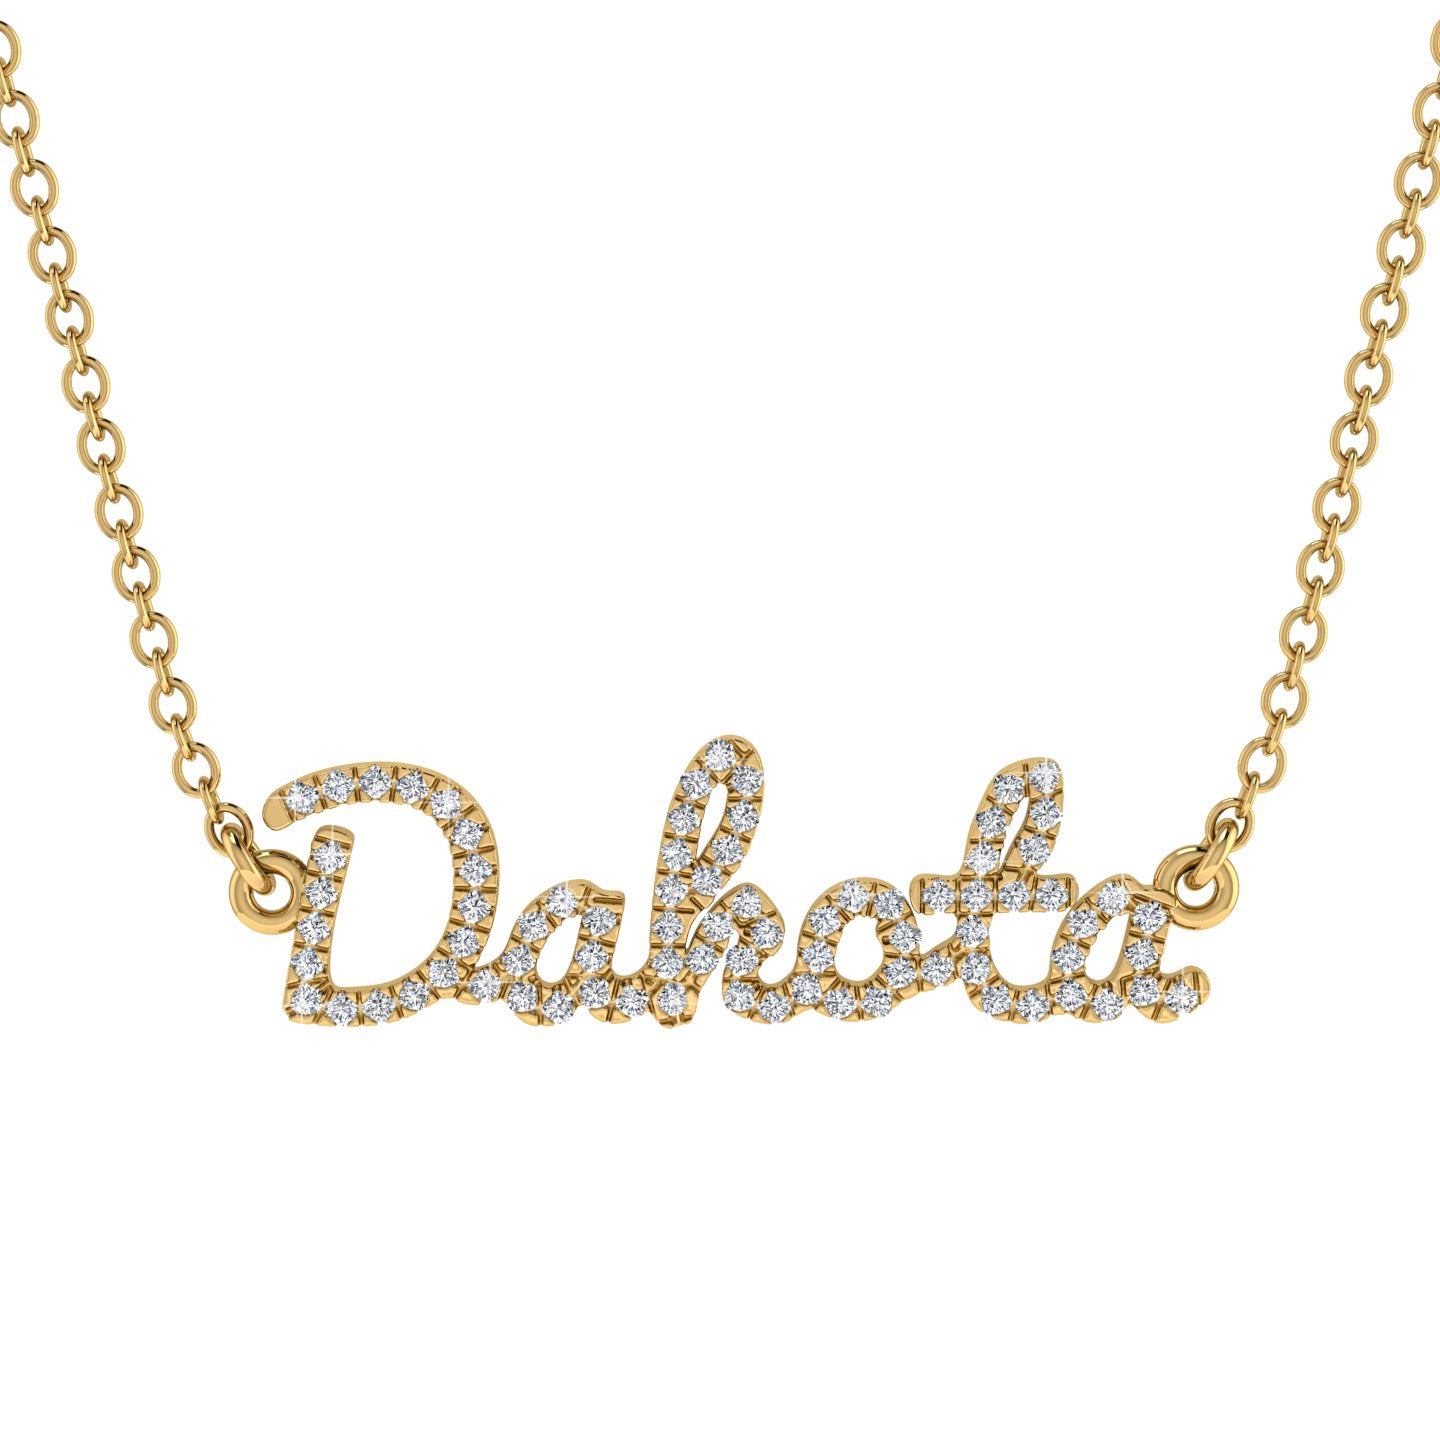 Segal Jewelry Letter Name Necklace